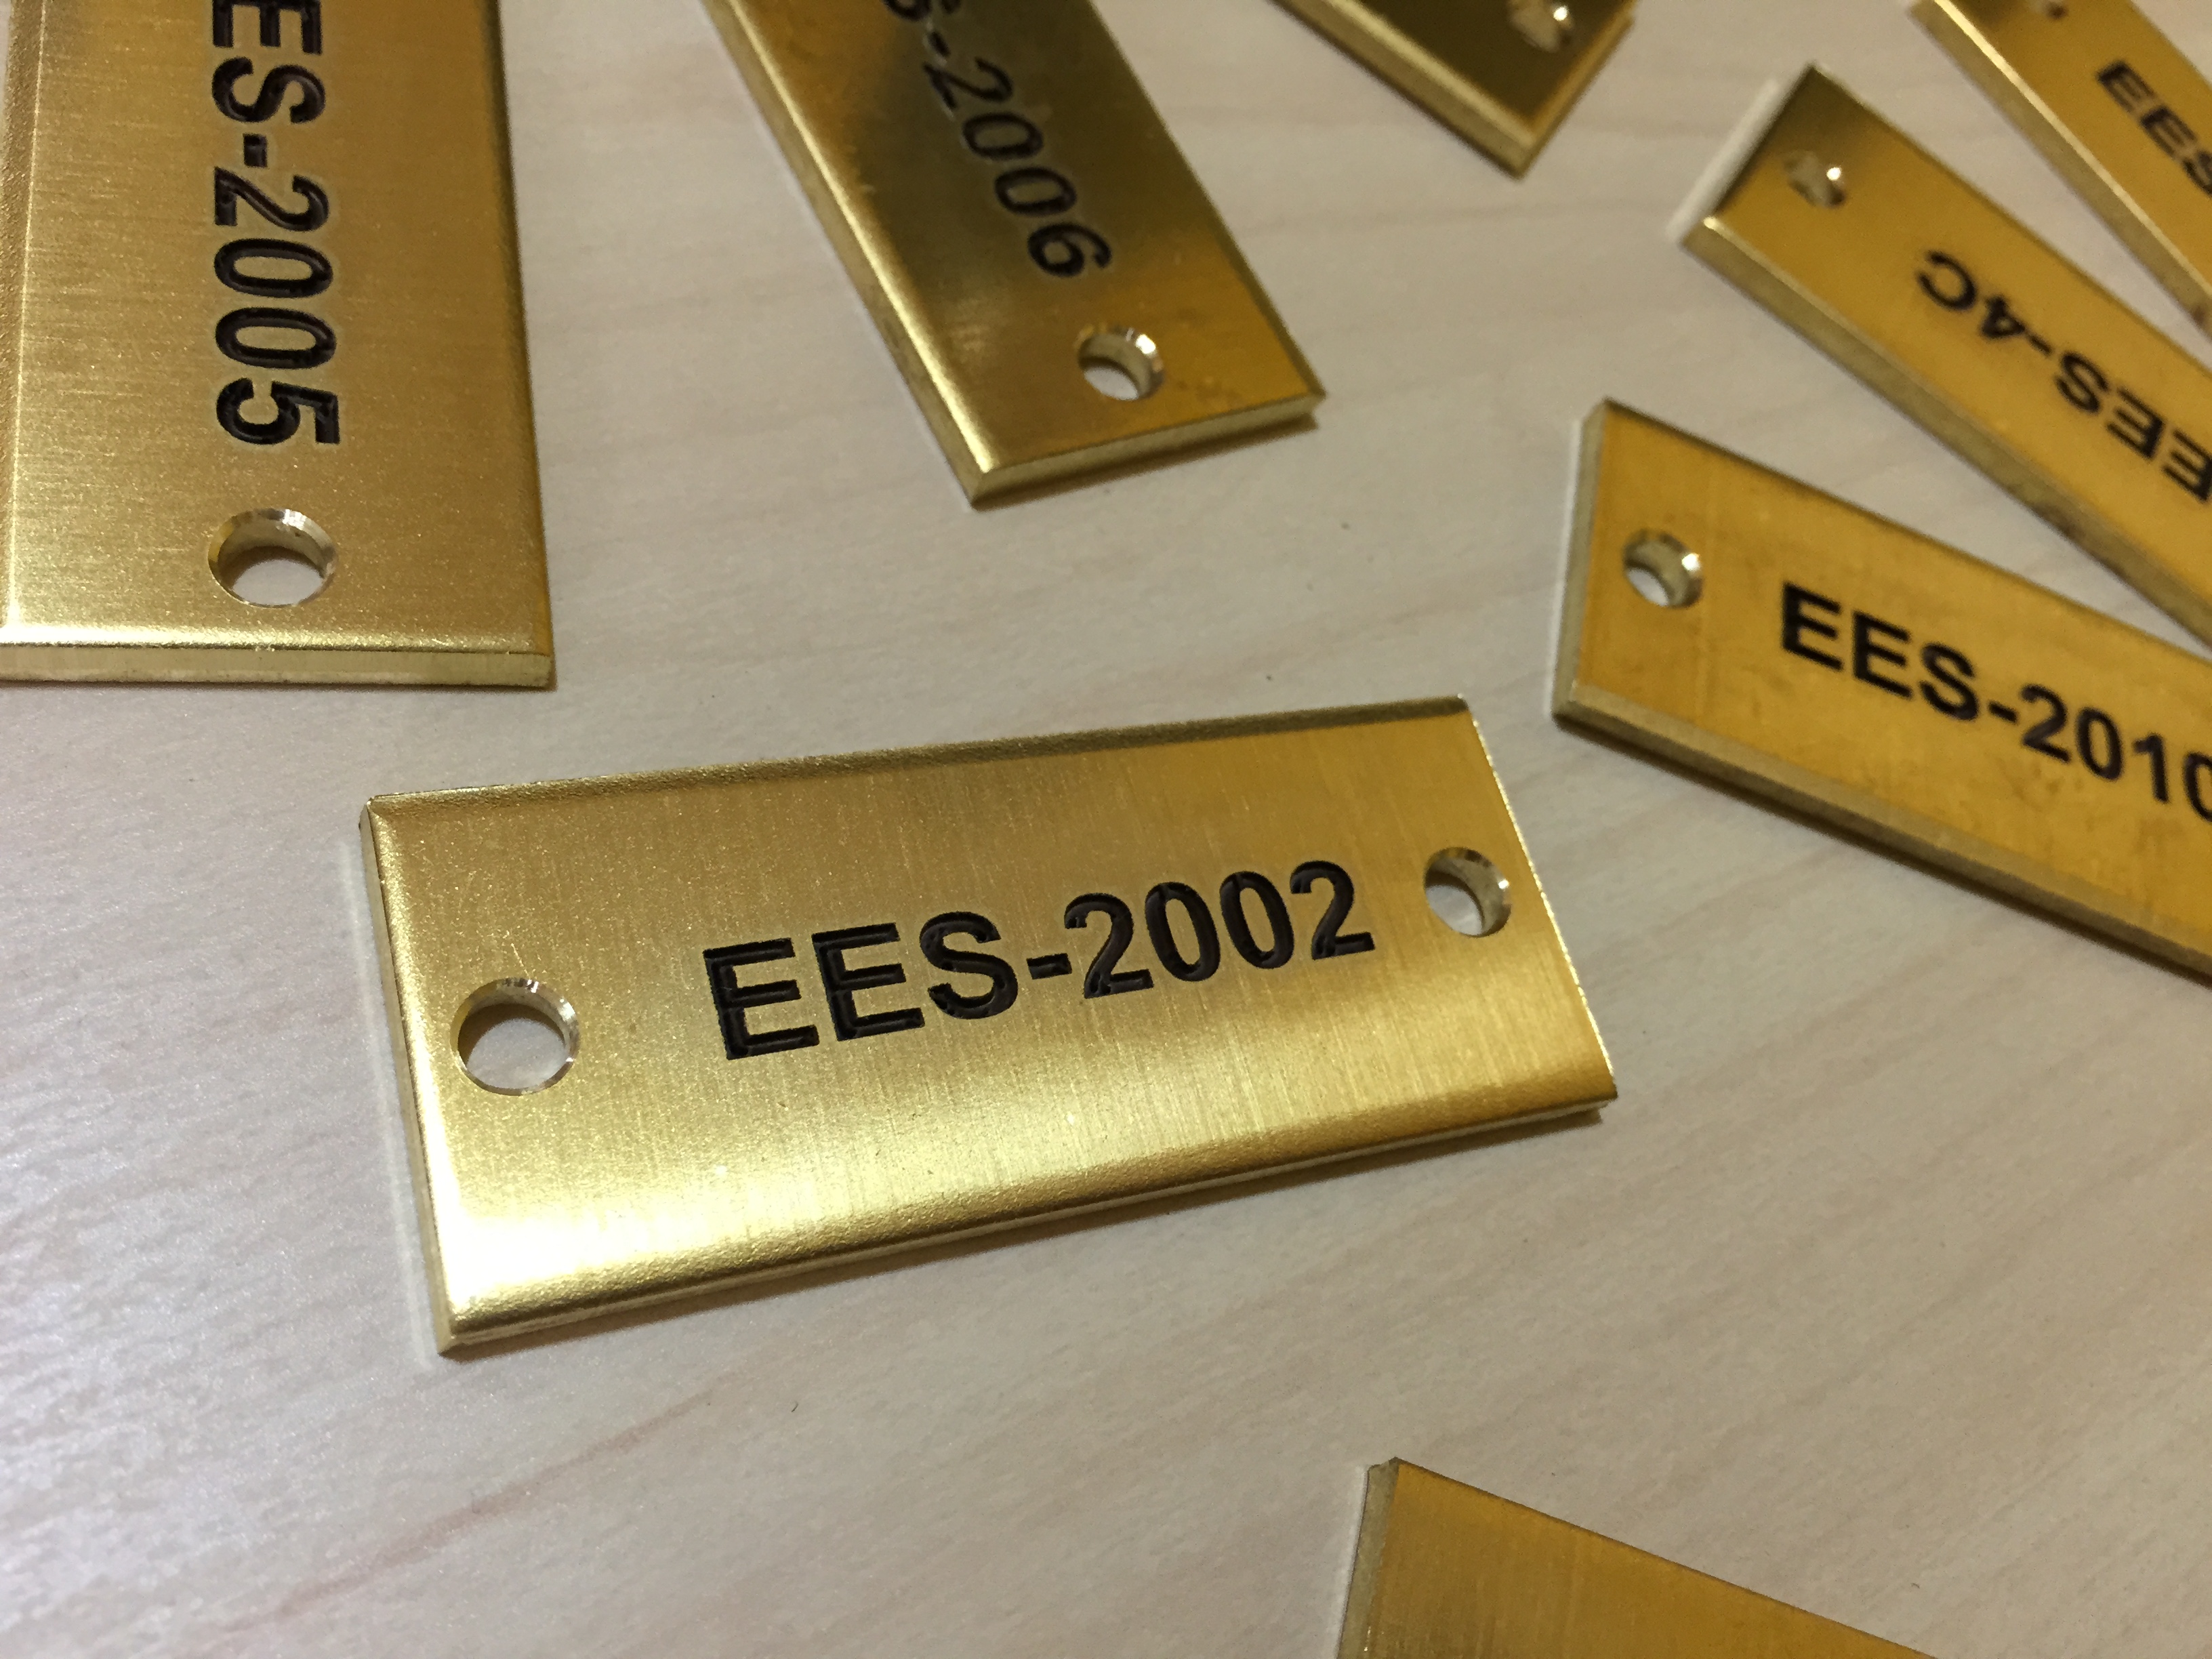 brass-metal-tags-fiber-laser-engraved-for-laguardia-airport-in-nyc